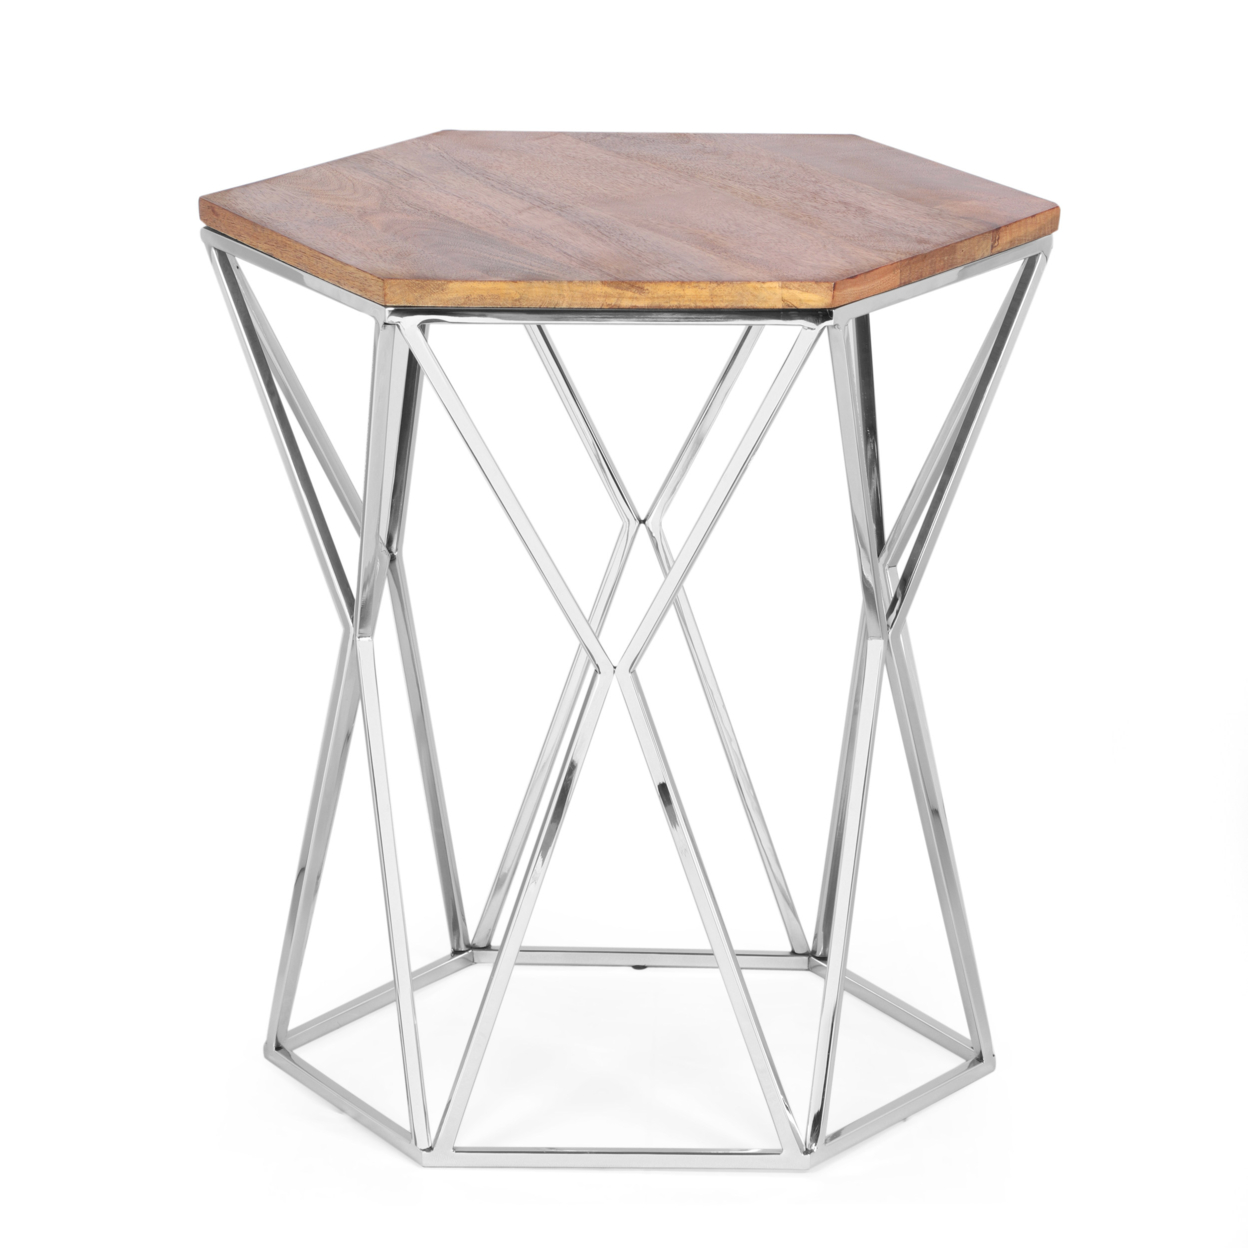 Bellion Rustic Glam Handcrafted Mango Wood Side Table, Walnut And Polished Nickel